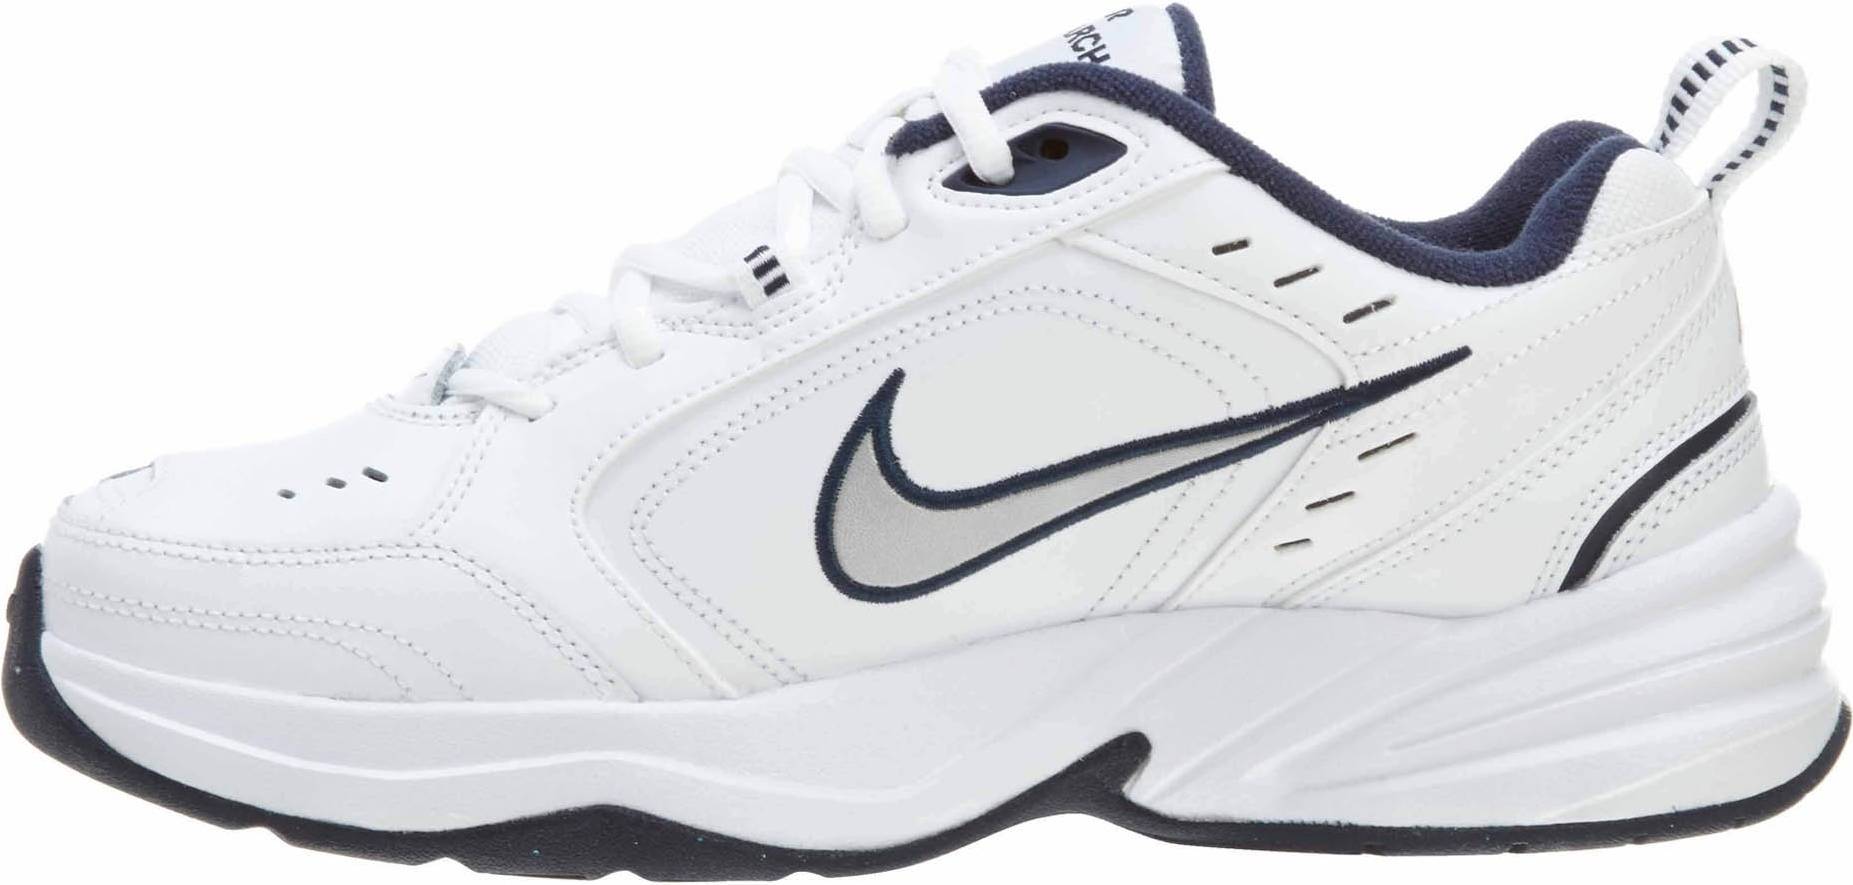 Interactie Billy Nietje Nike Air Monarch IV Review, Facts, Comparison | RunRepeat